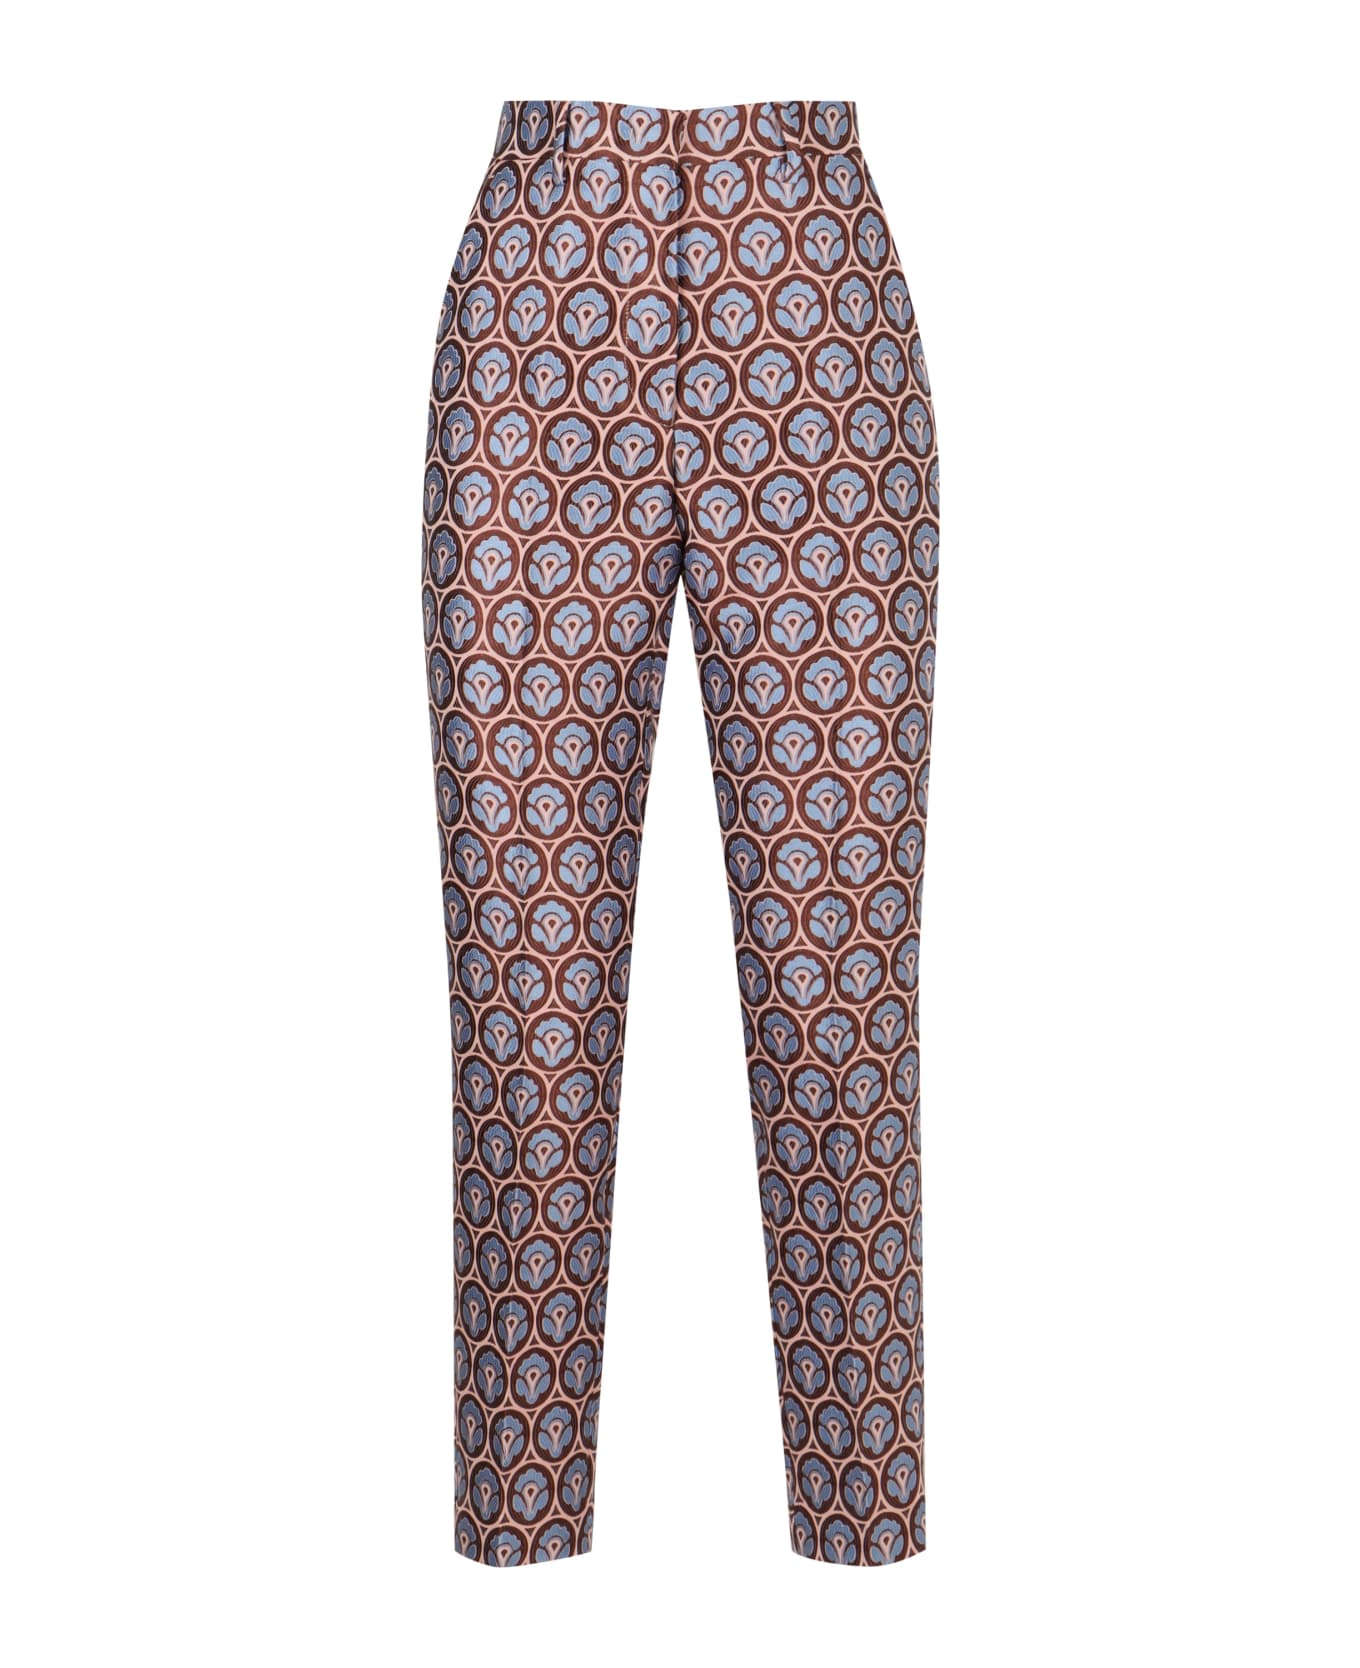 Etro Cropped Cigarette Trousers - BLUE